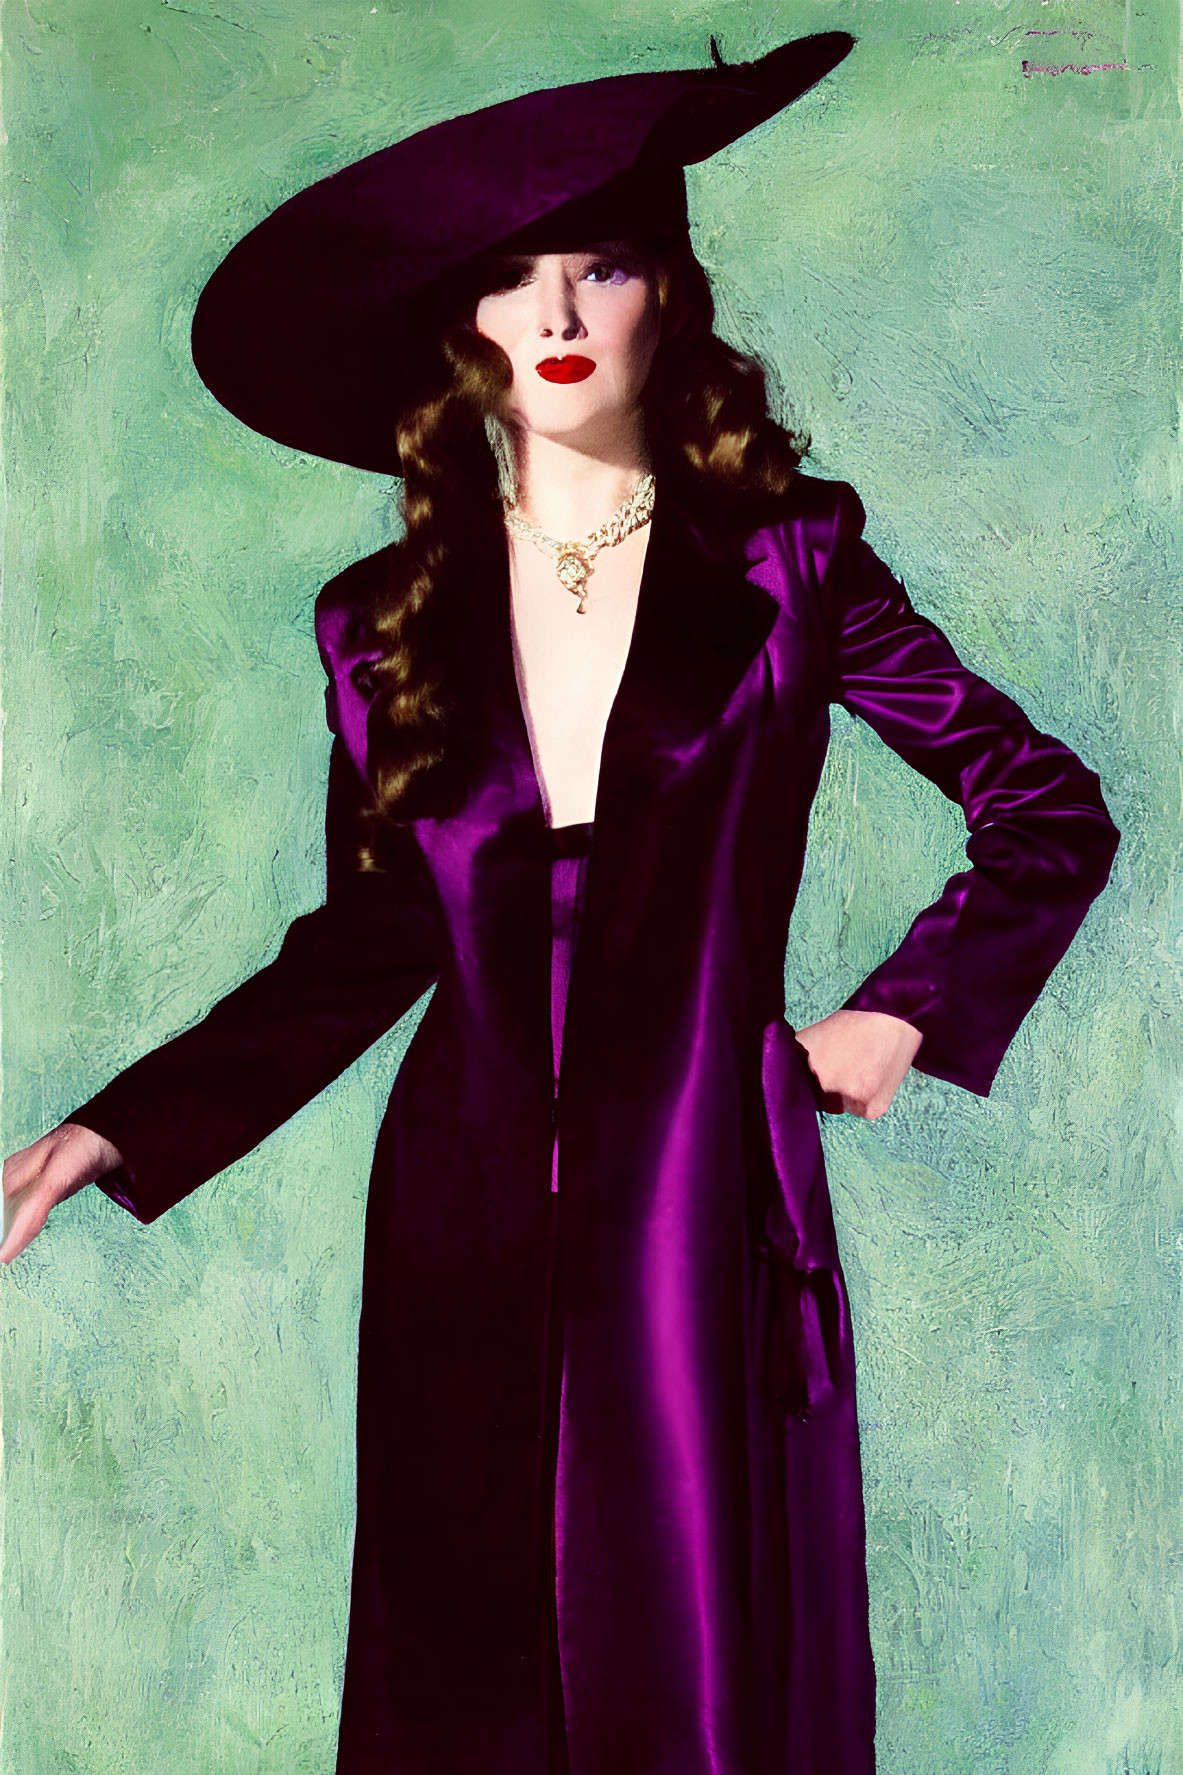 Elegant Woman in Purple Coat and Wide-Brimmed Hat on Green Background